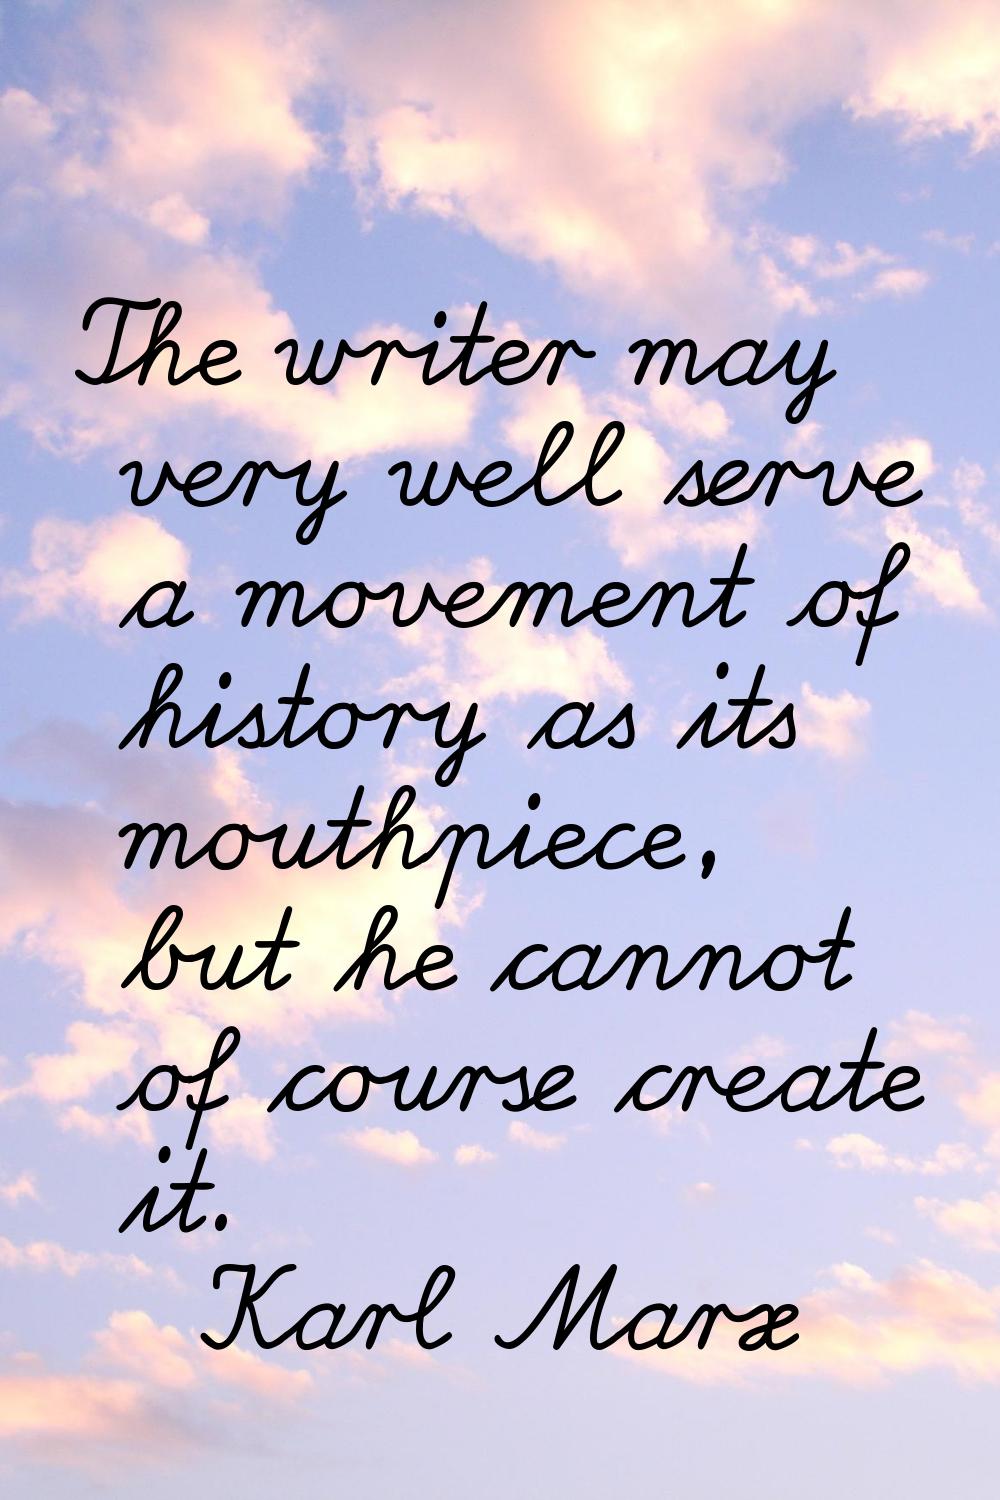 The writer may very well serve a movement of history as its mouthpiece, but he cannot of course cre